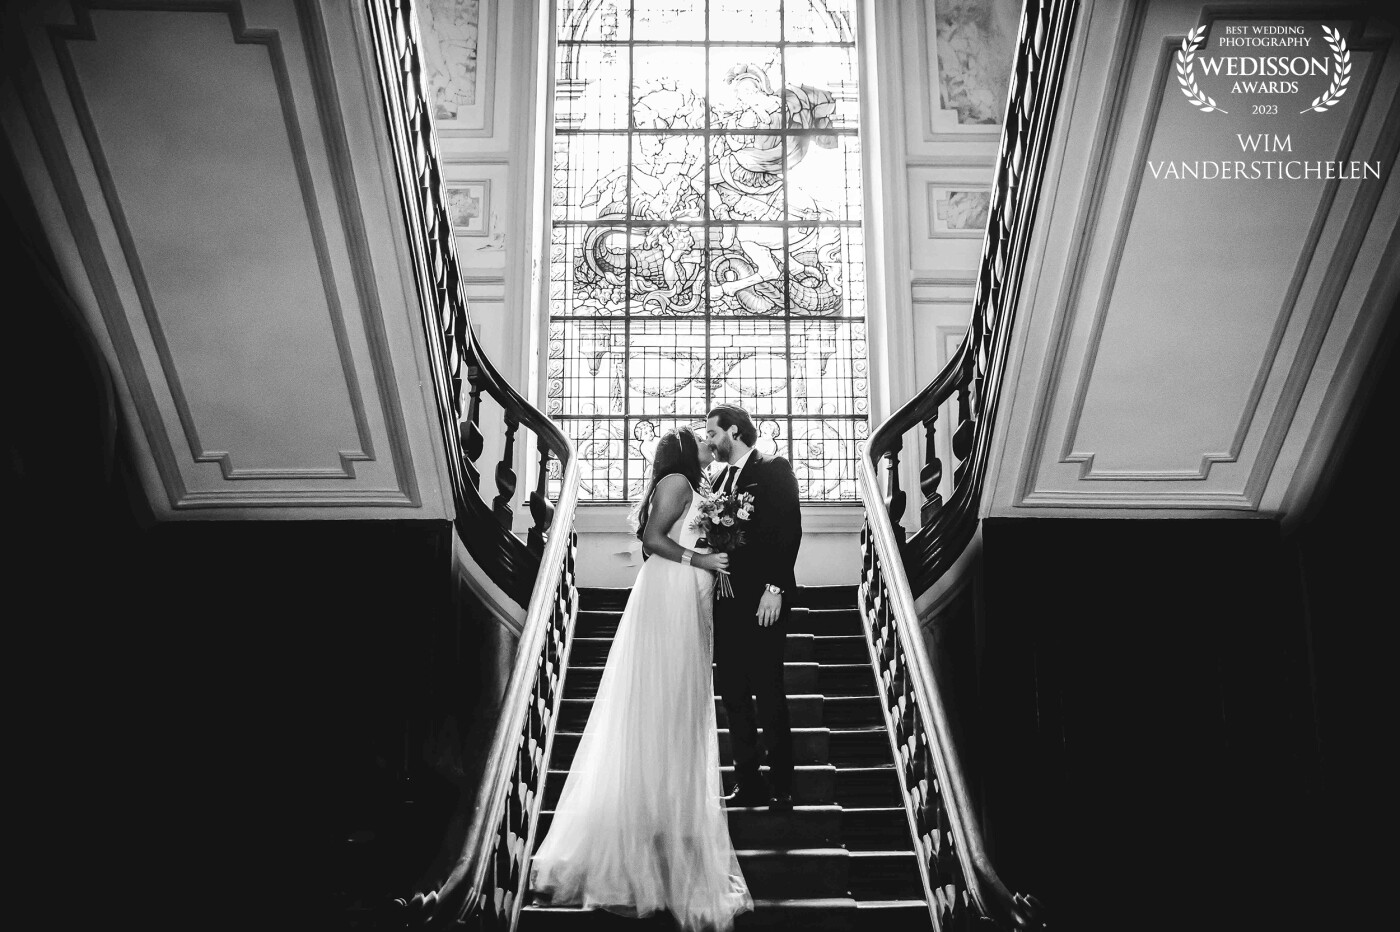 The couple had chosen their old school where they first met as a location for the shoot. Wow! I just fell in love with the old stairs and windows and immediatly knew these were going to be great pictures.